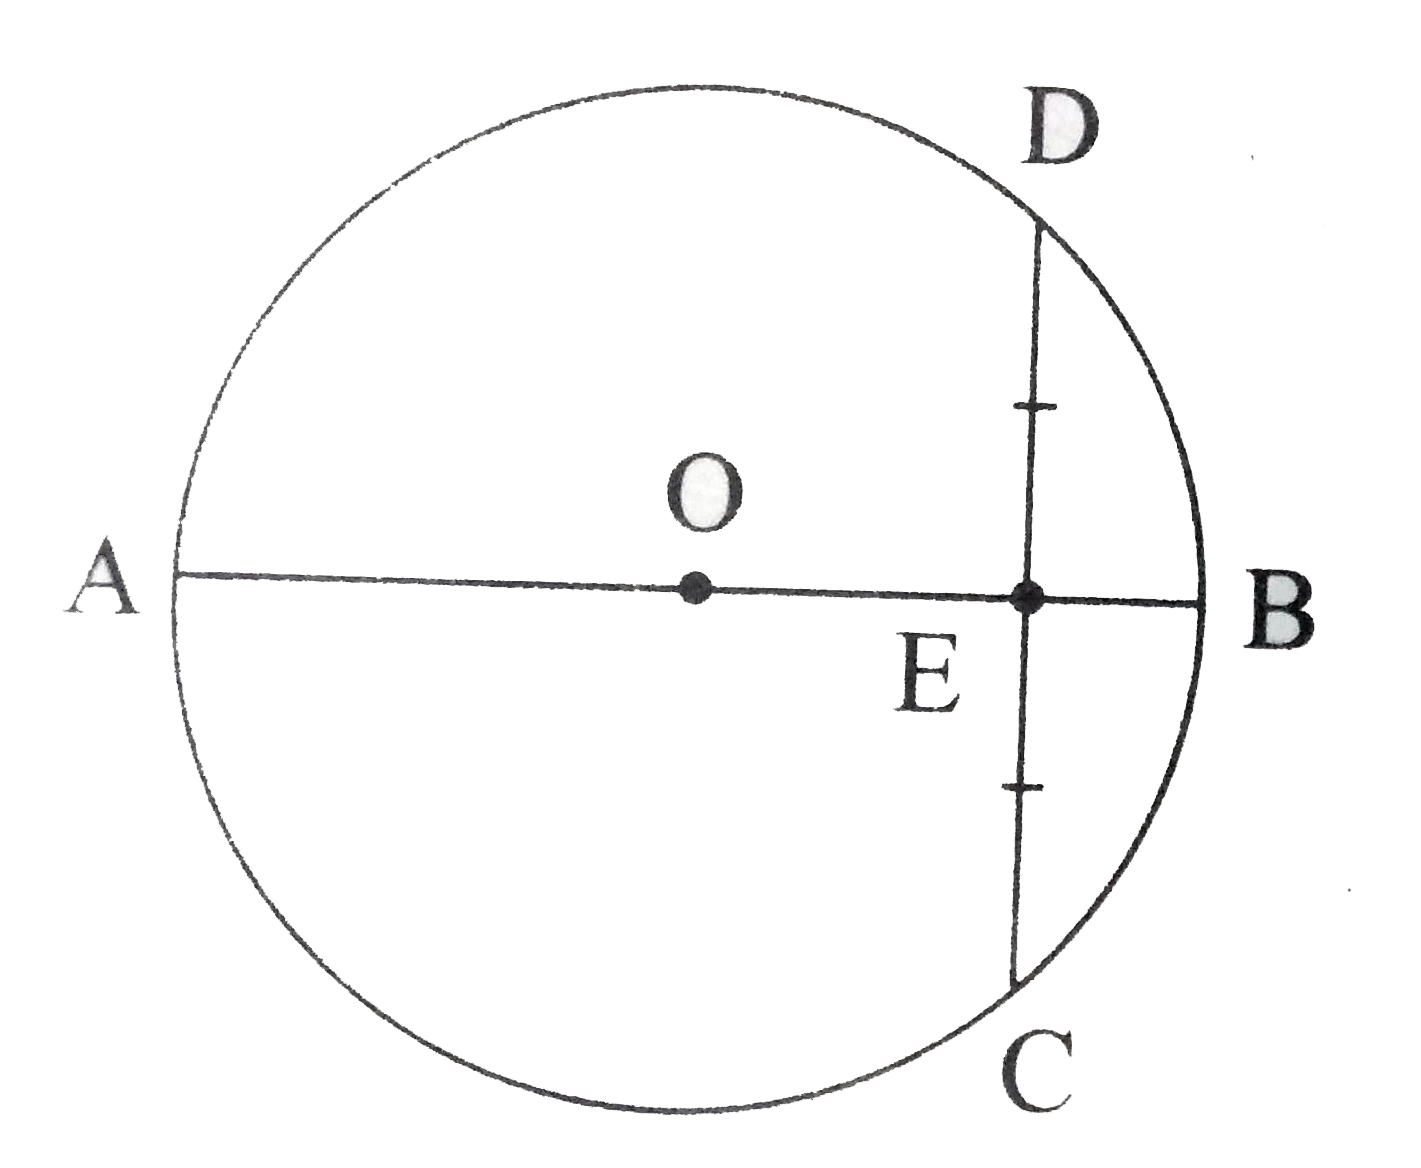 In the figure, O is the centre of a circle and diameter AB bisects the chord CD at a point E such that CE = ED = 8 cm and EB = 4 cm. The radius of the circle is  . . . . .